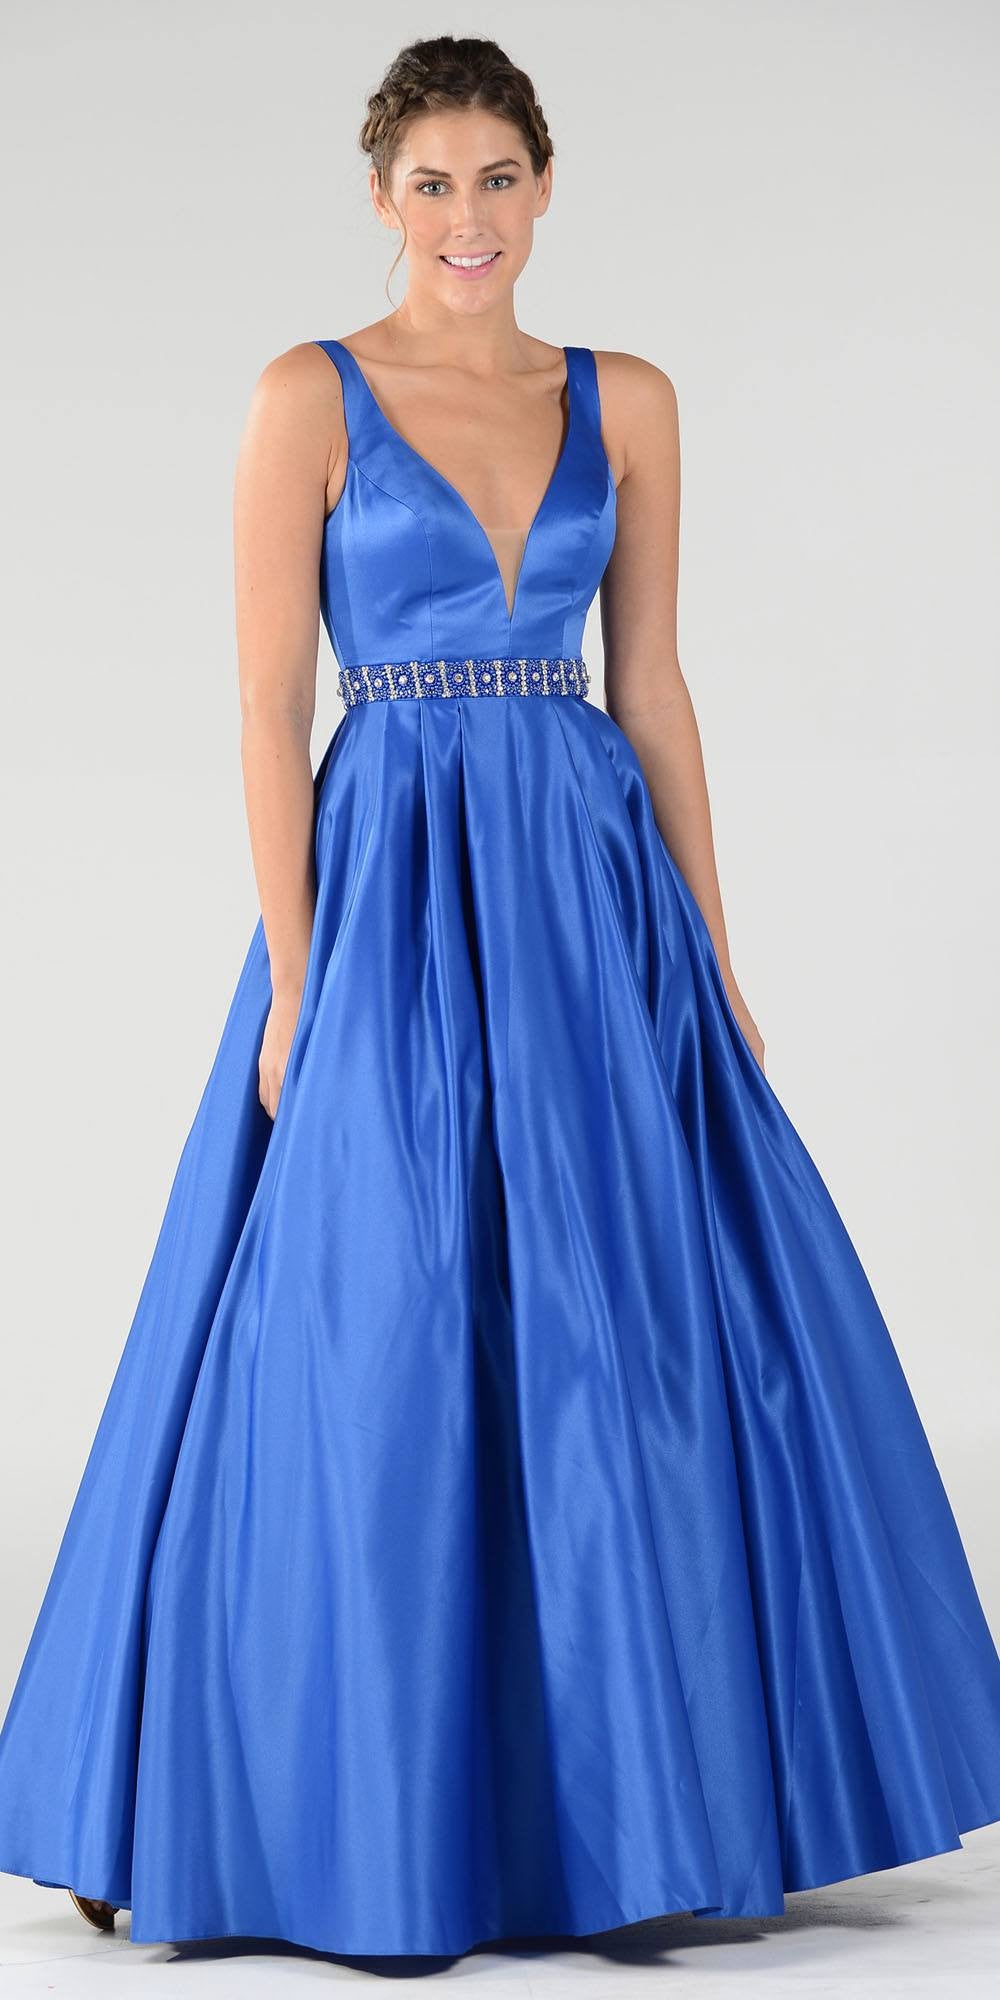 Poly USA 7932 Embellished Waist Plunging V-Neck Royal Blue Satin Ball Gown A-Line